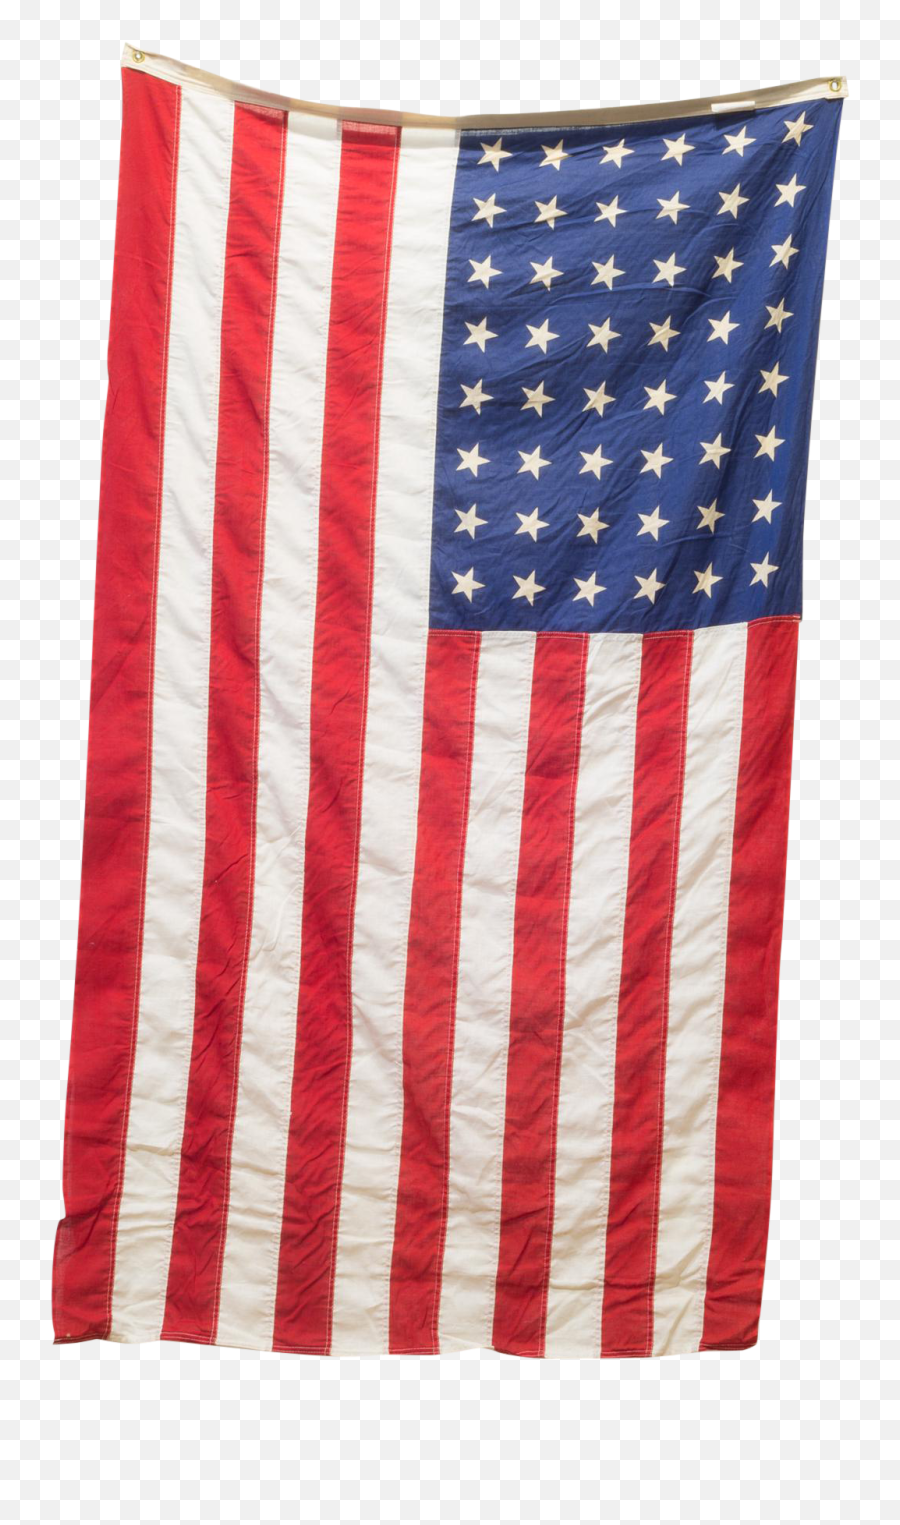 What Did The American Flag Look Like In 1940 - About Flag American Flag In The Emoji,Emoji American Flag Buring